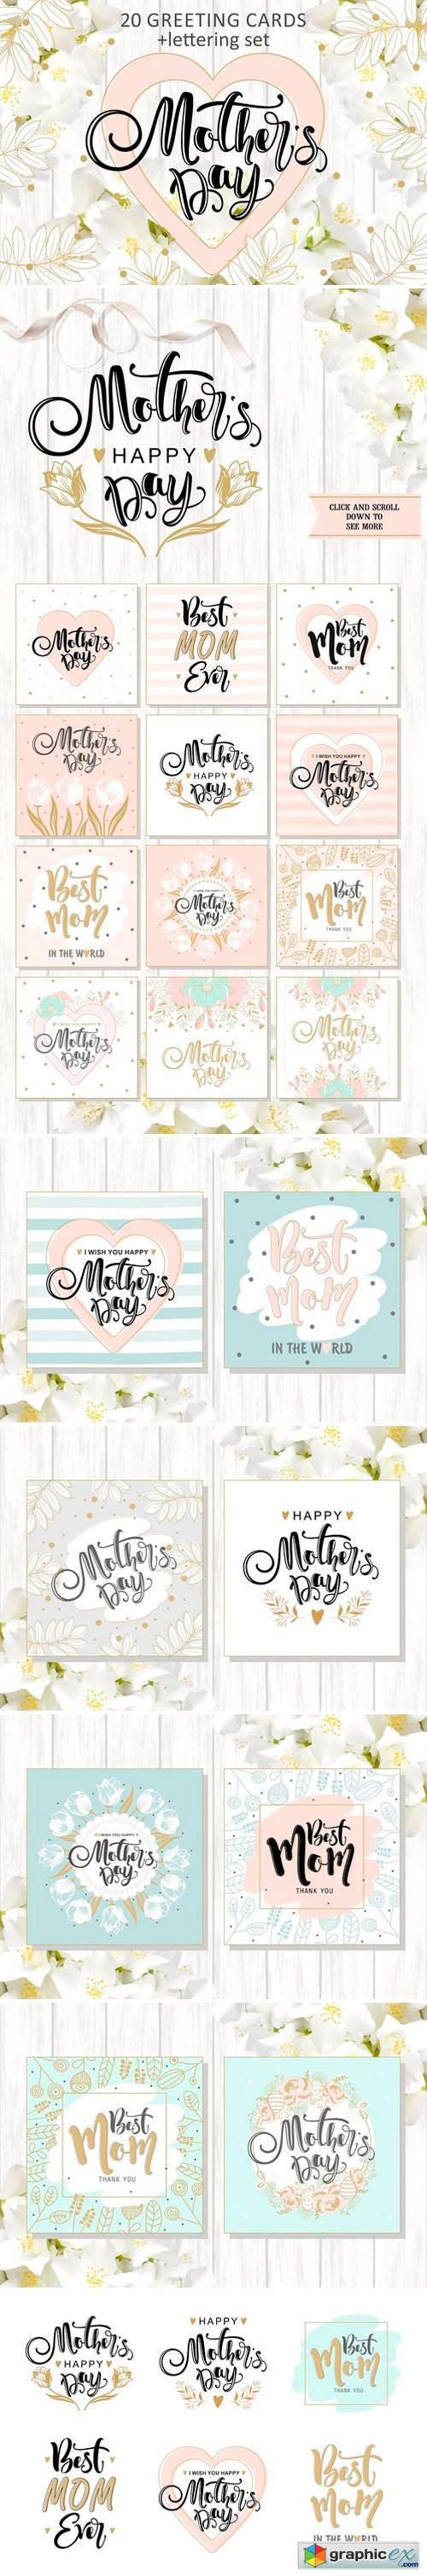 Mother's day gift cards set